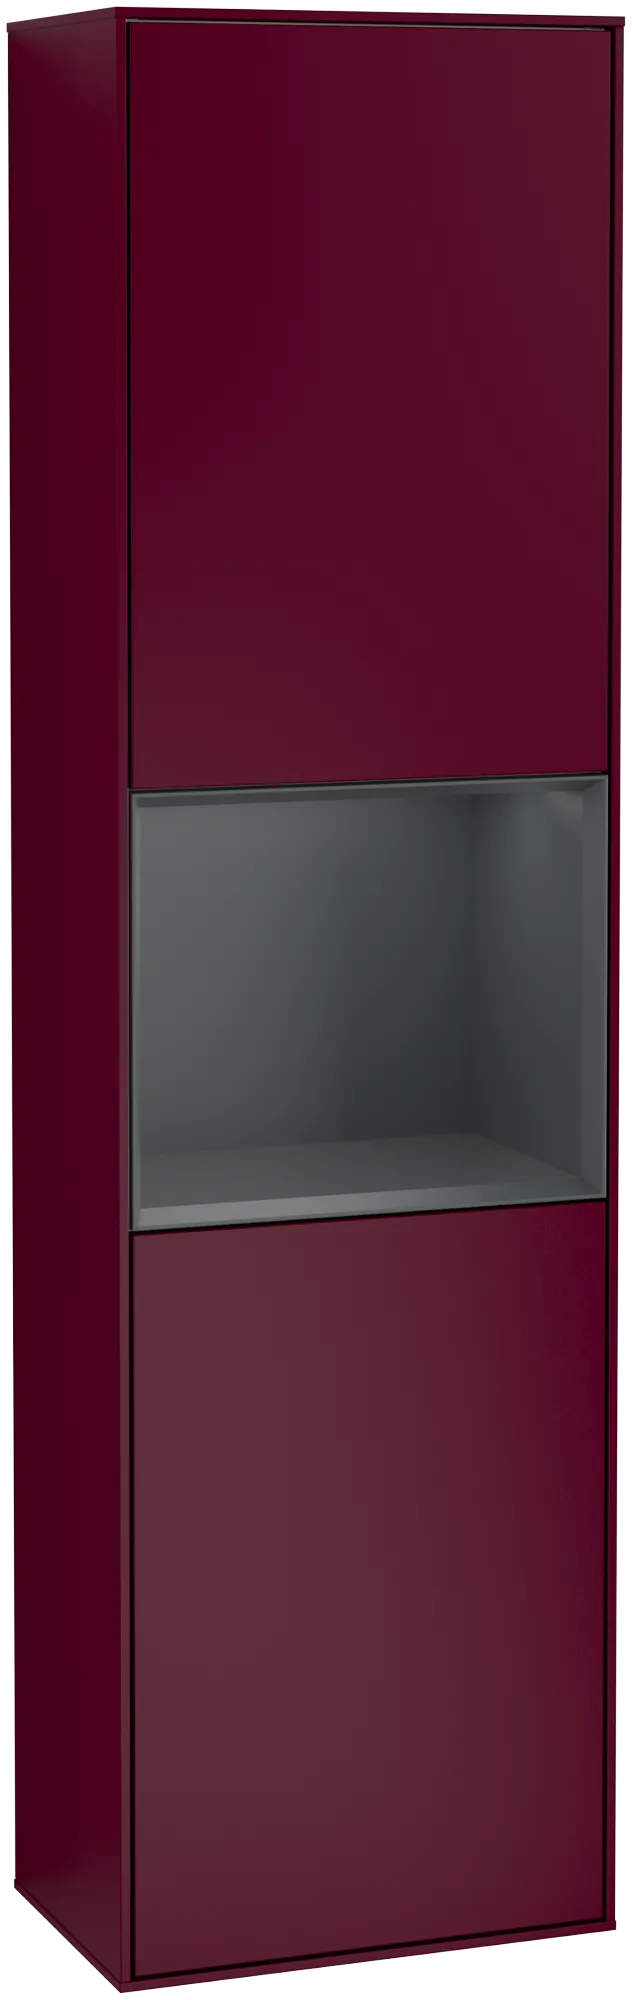 Picture of VILLEROY BOCH Finion Tall cabinet, with lighting, 2 doors, 418 x 1516 x 270 mm, Peony Matt Lacquer / Midnight Blue Matt Lacquer #G470HGHB